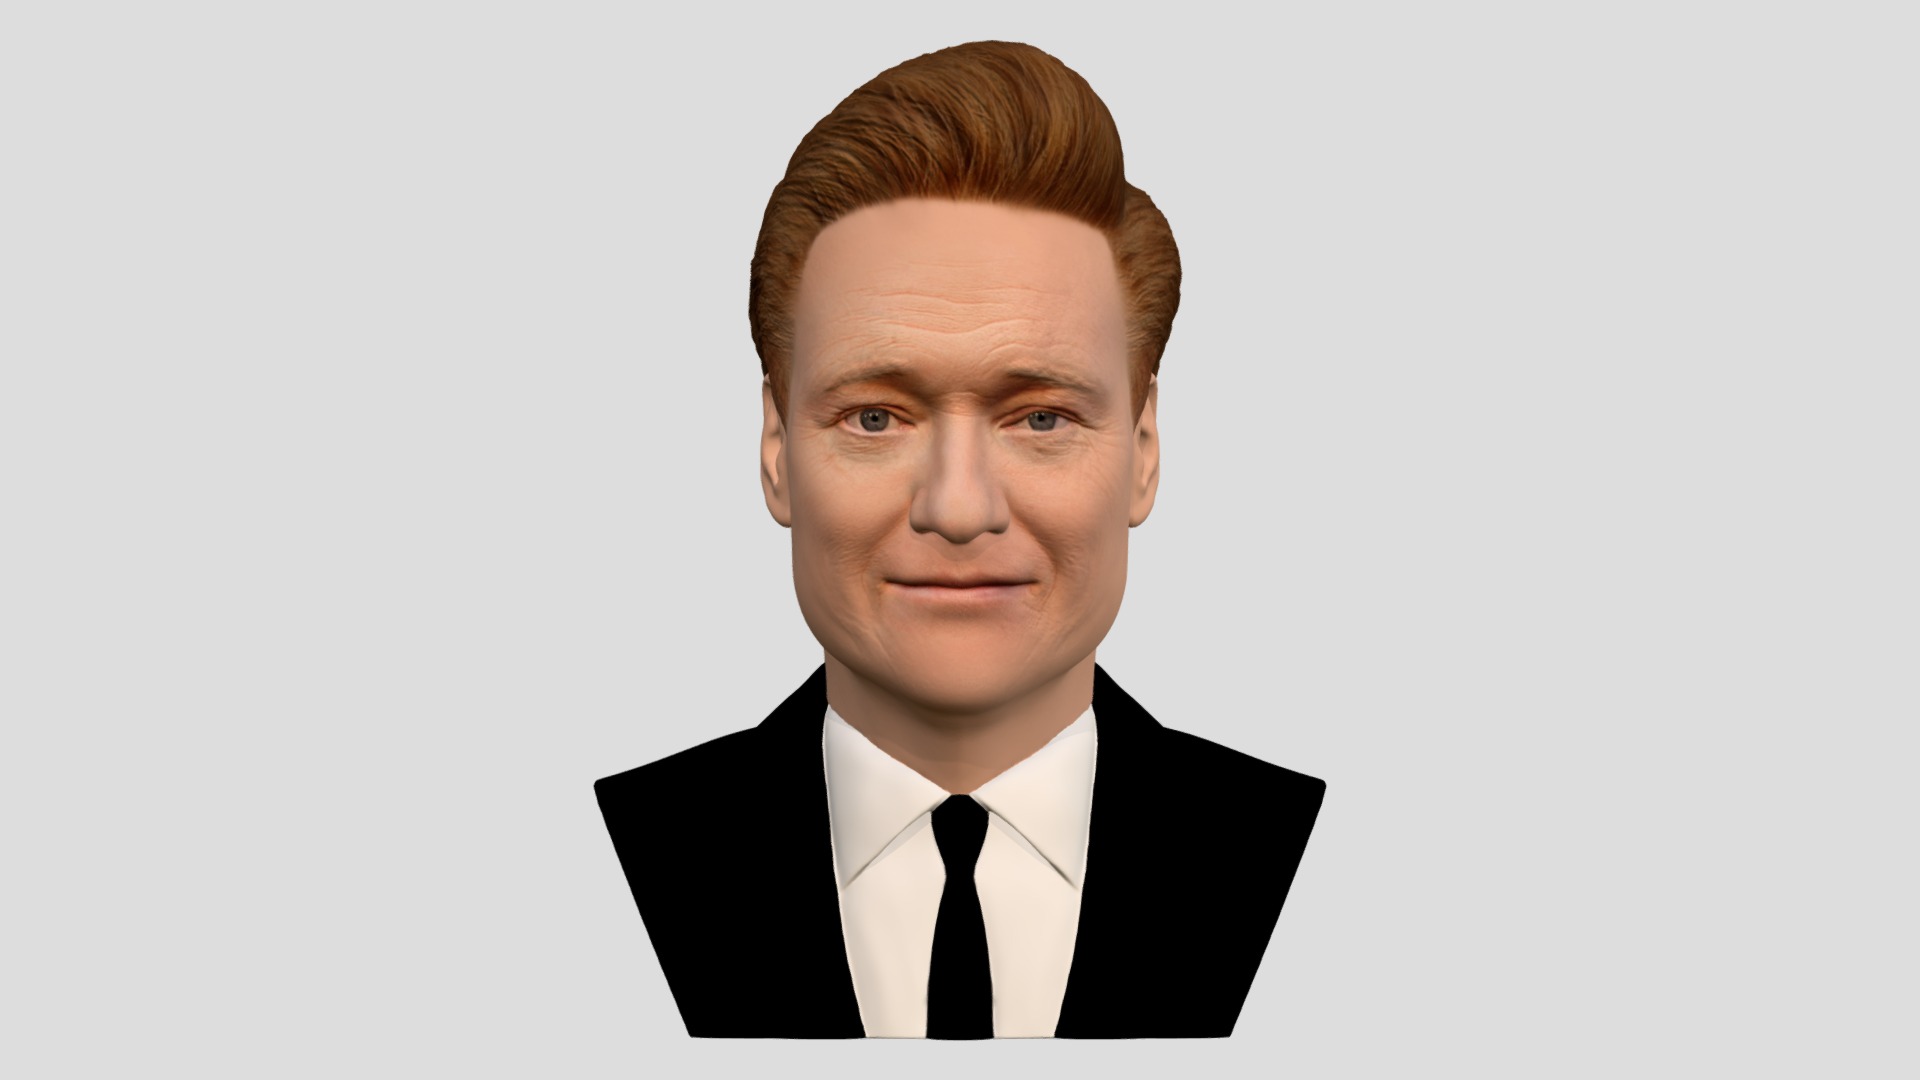 3D model Conan O’Brien bust for full color 3D printing - This is a 3D model of the Conan O'Brien bust for full color 3D printing. The 3D model is about a man in a suit.